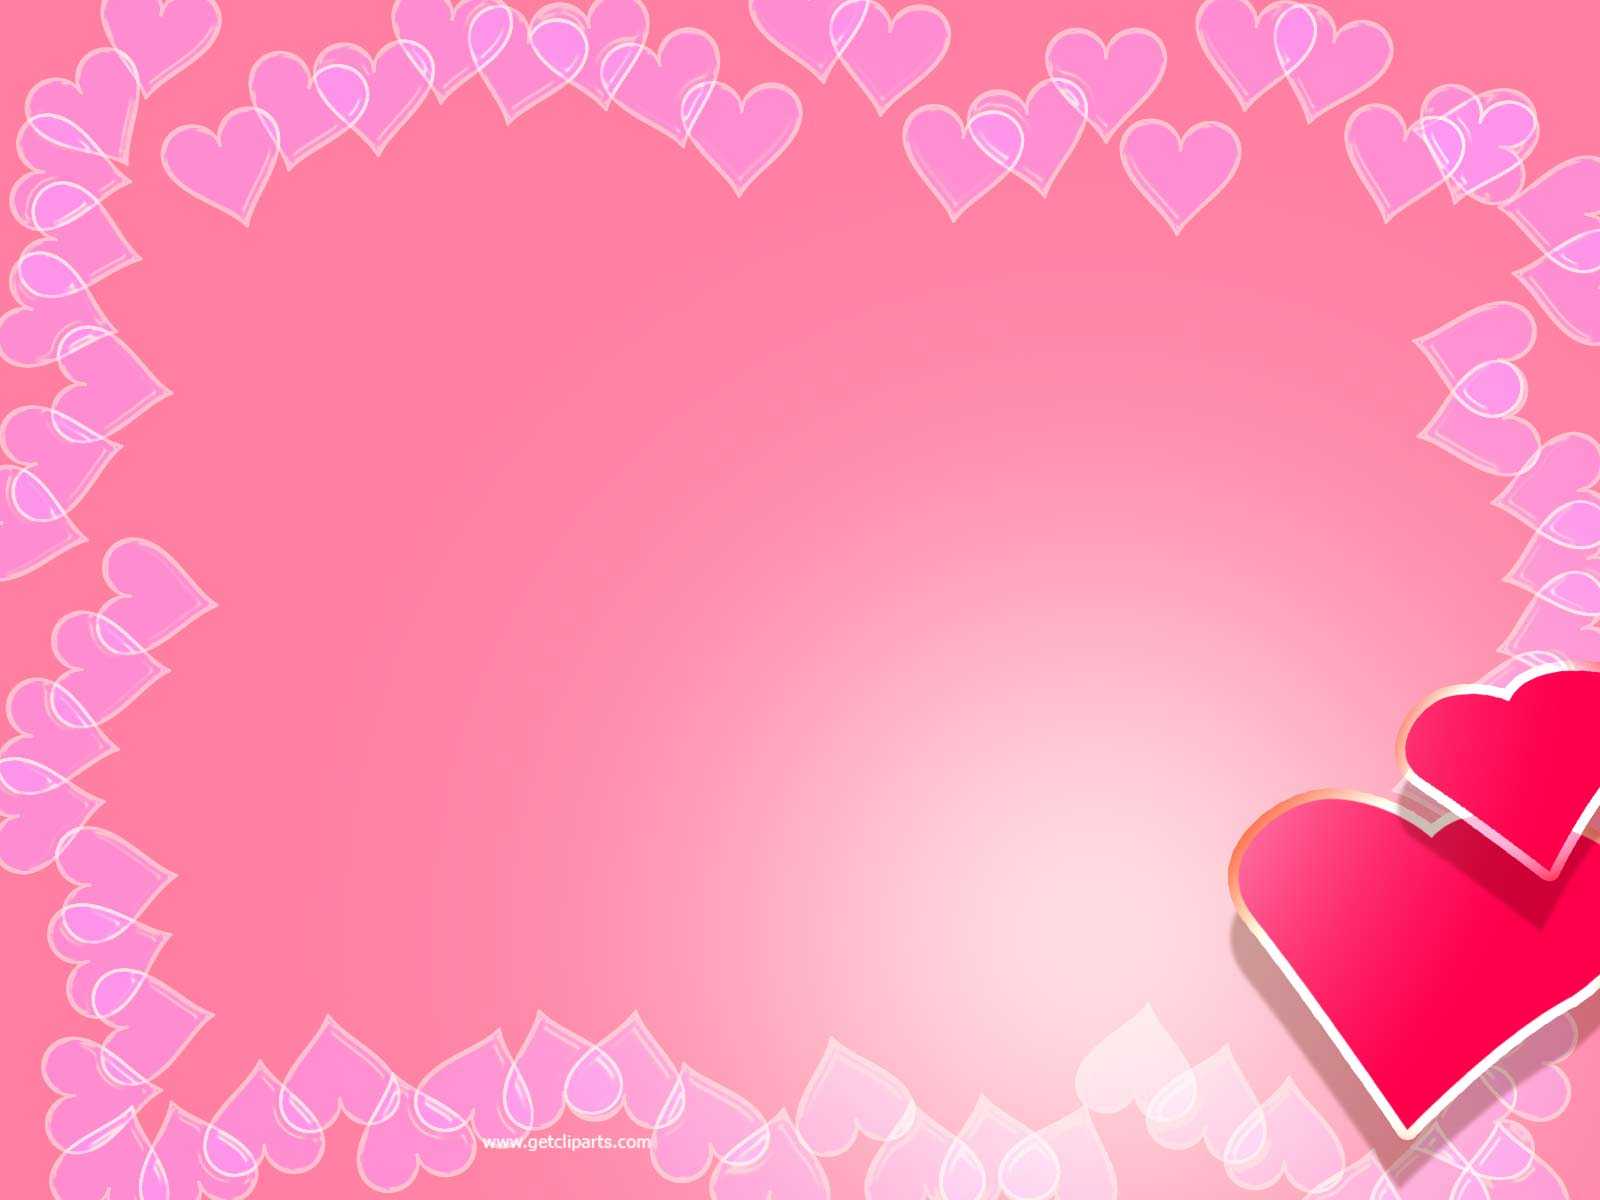 Valentine Backgrounds For Powerpoint - Border And Frame Ppt Throughout Valentine Powerpoint Templates Free